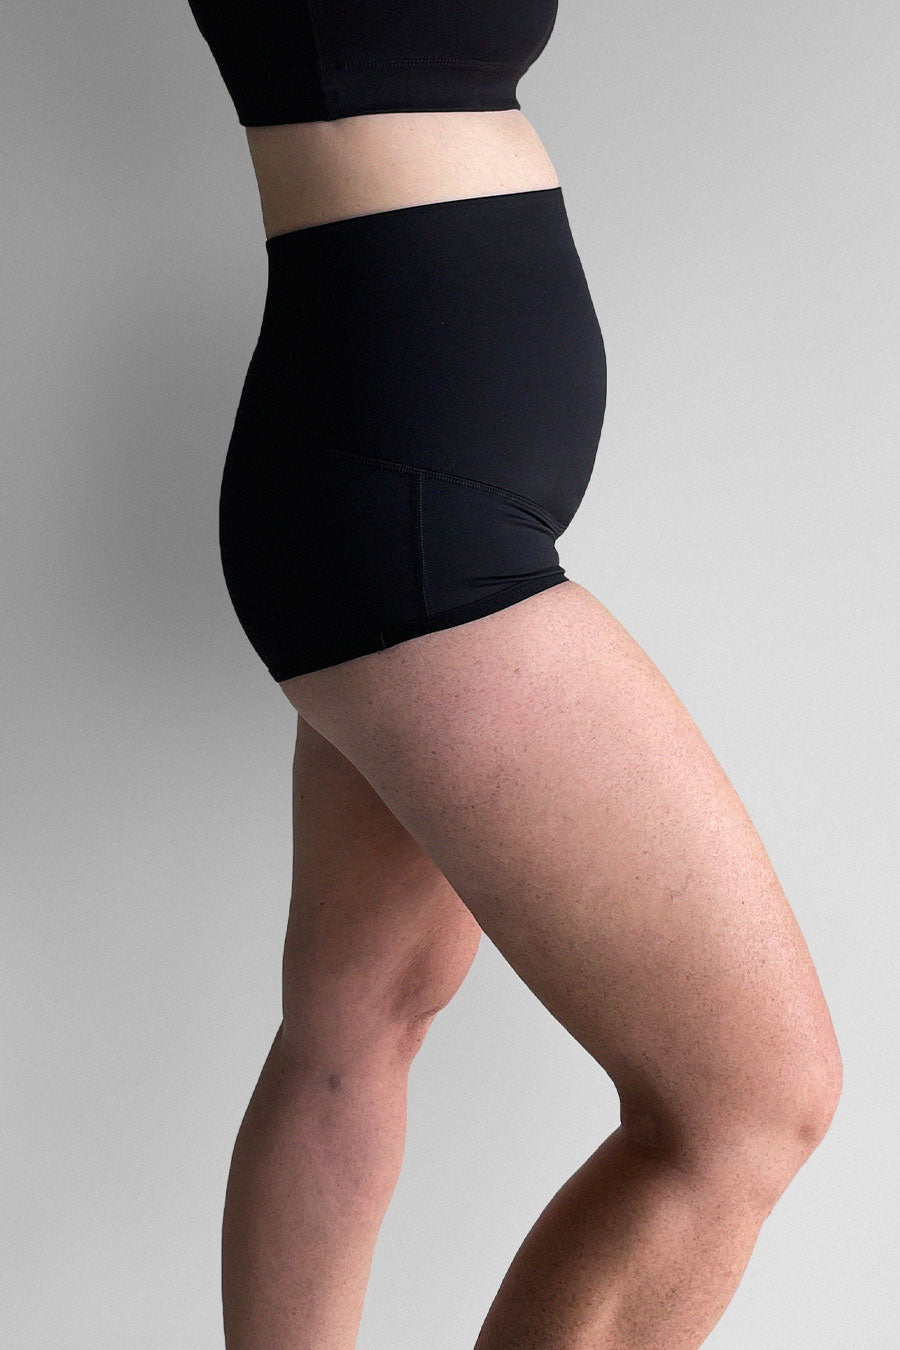 Tights for Women with Endometriosis